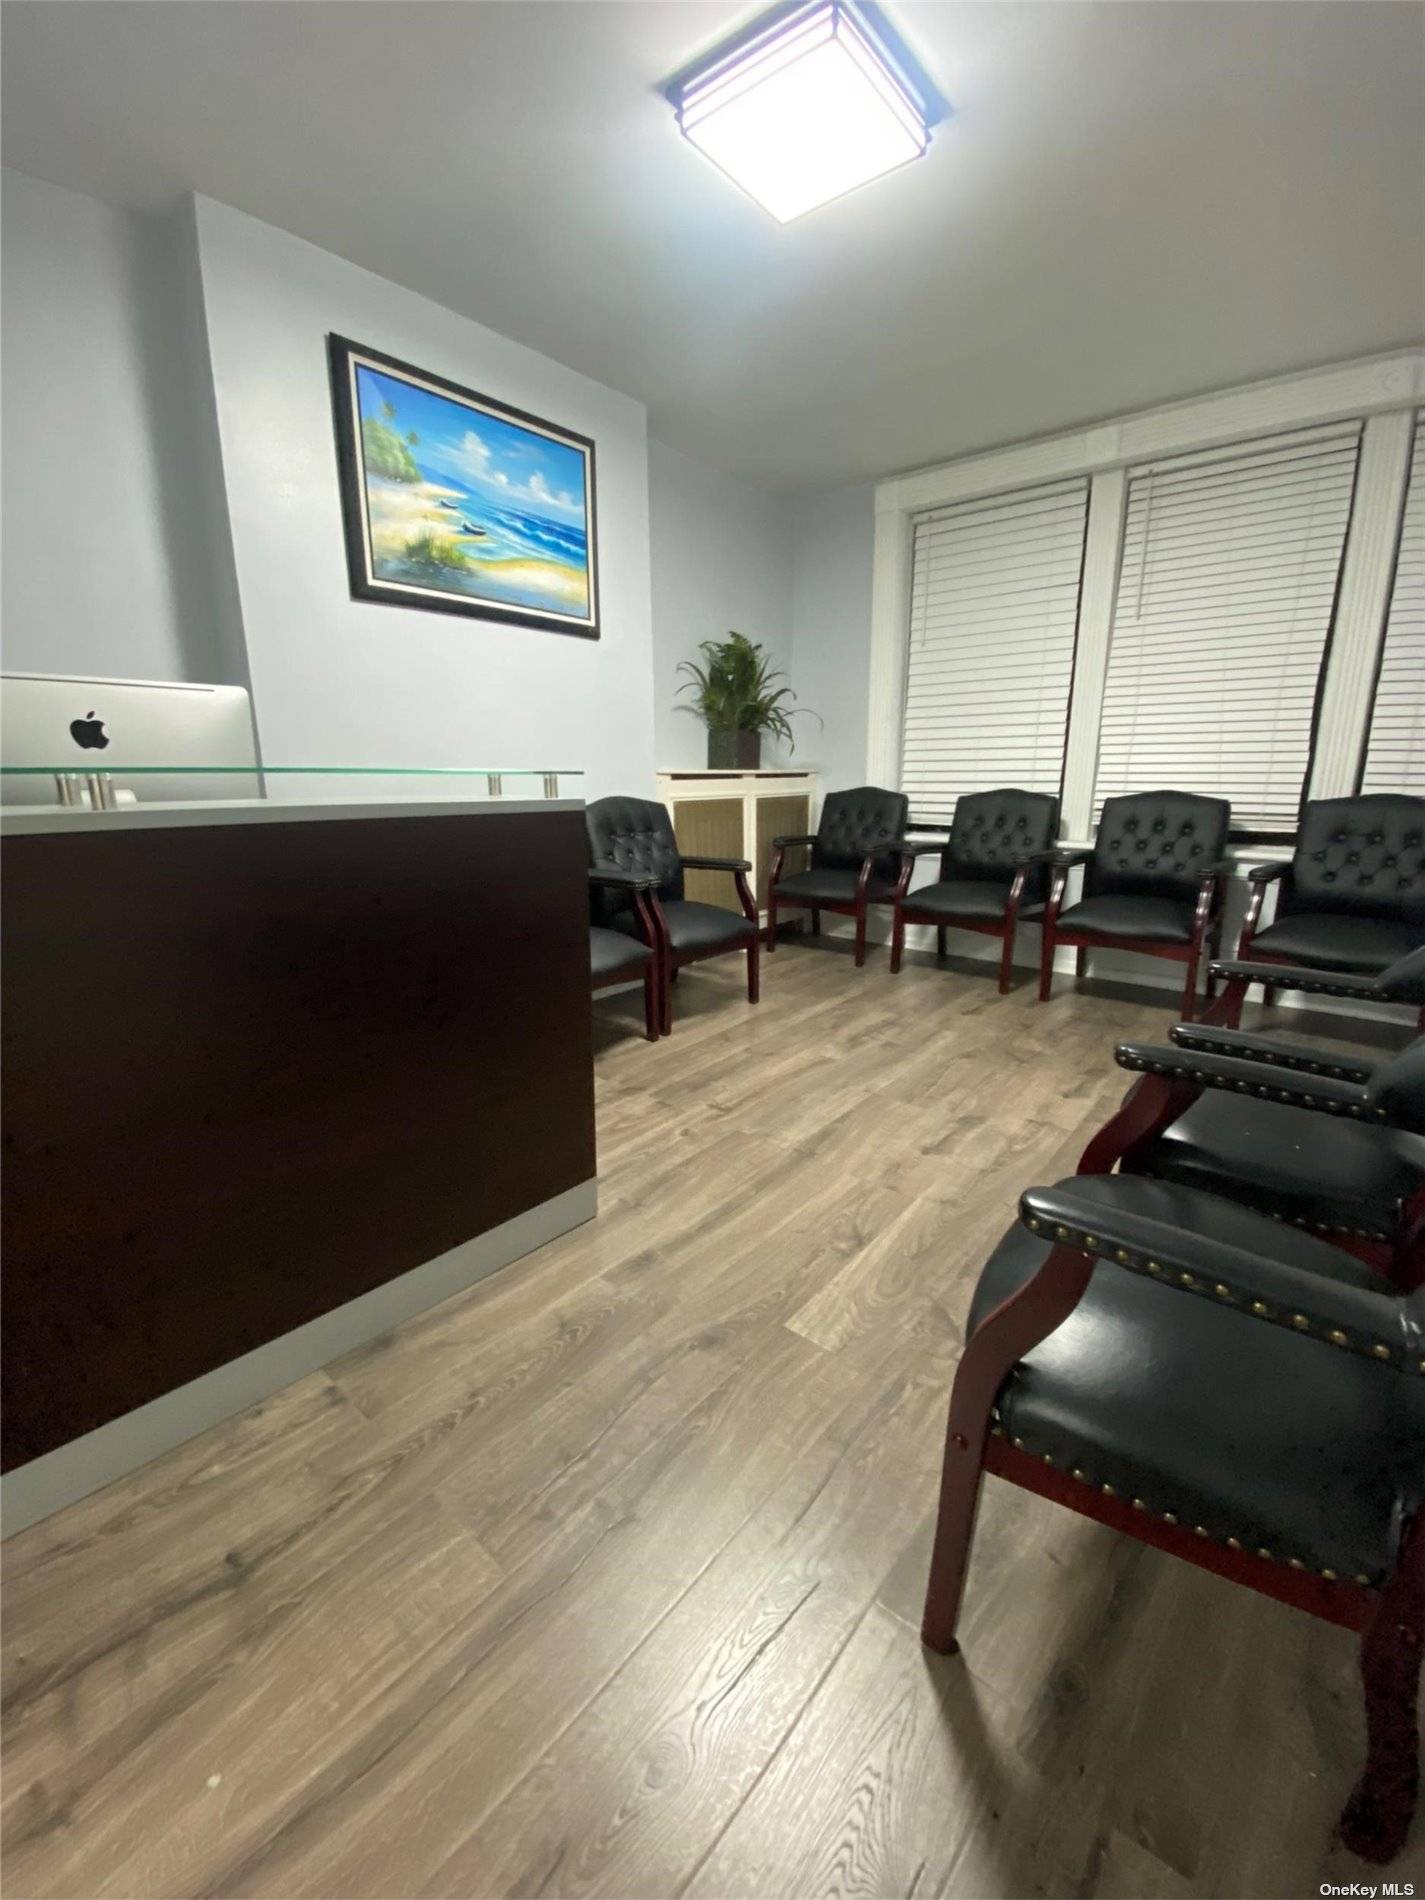 Excellent opportunity for Doctor to rent newly renovated office in top Queens neighborhood.